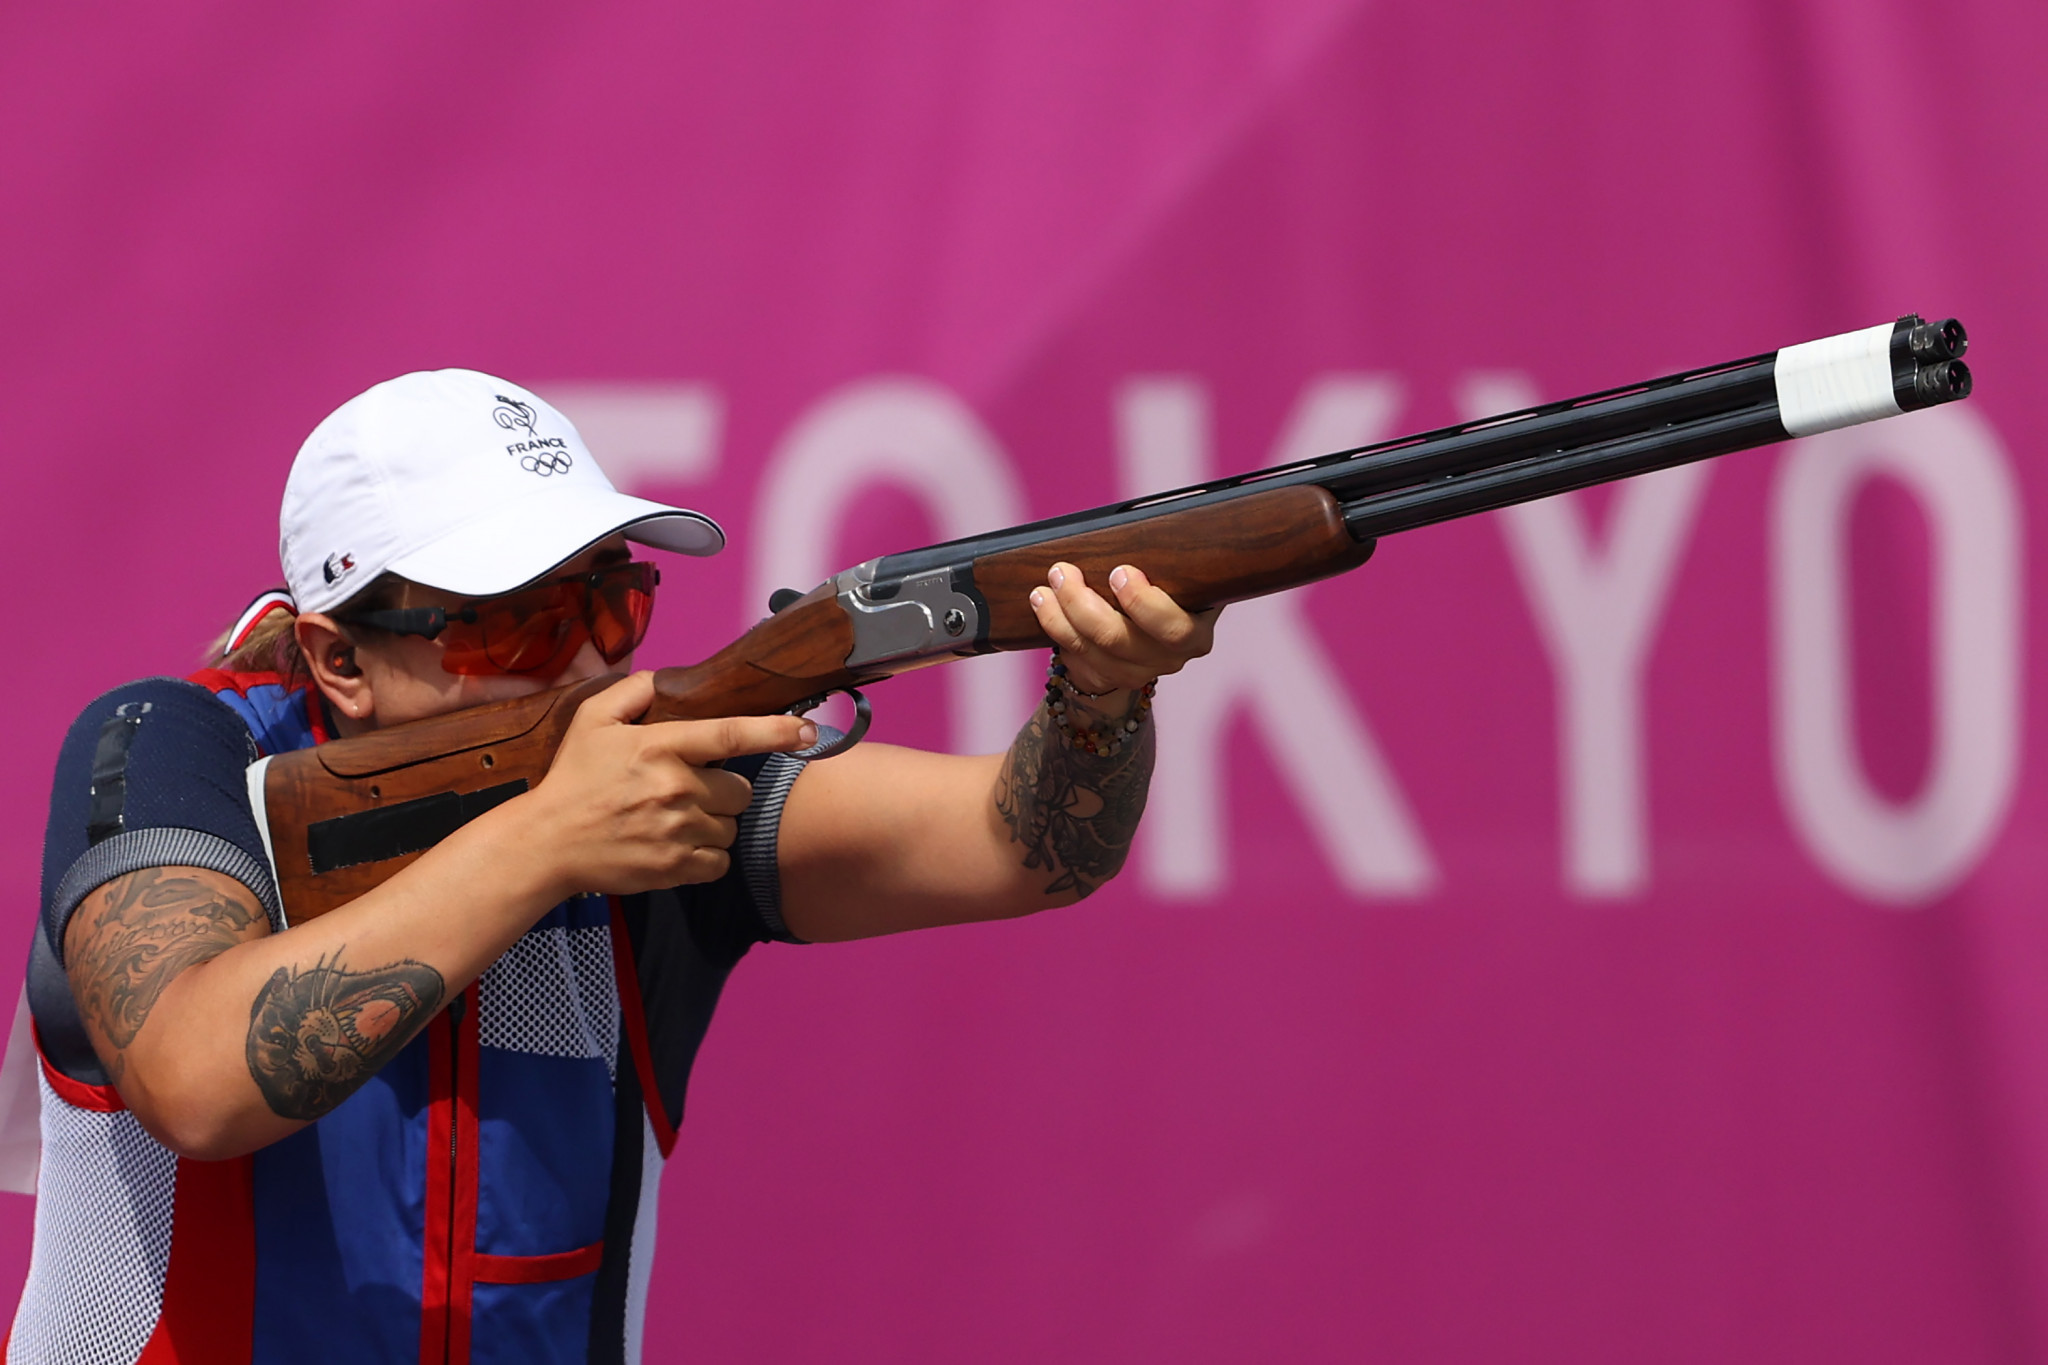 Lucie Anastassiou of France finished ninth in the women’s skeet event at the Tokyo 2020 Olympic Games ©Getty Images